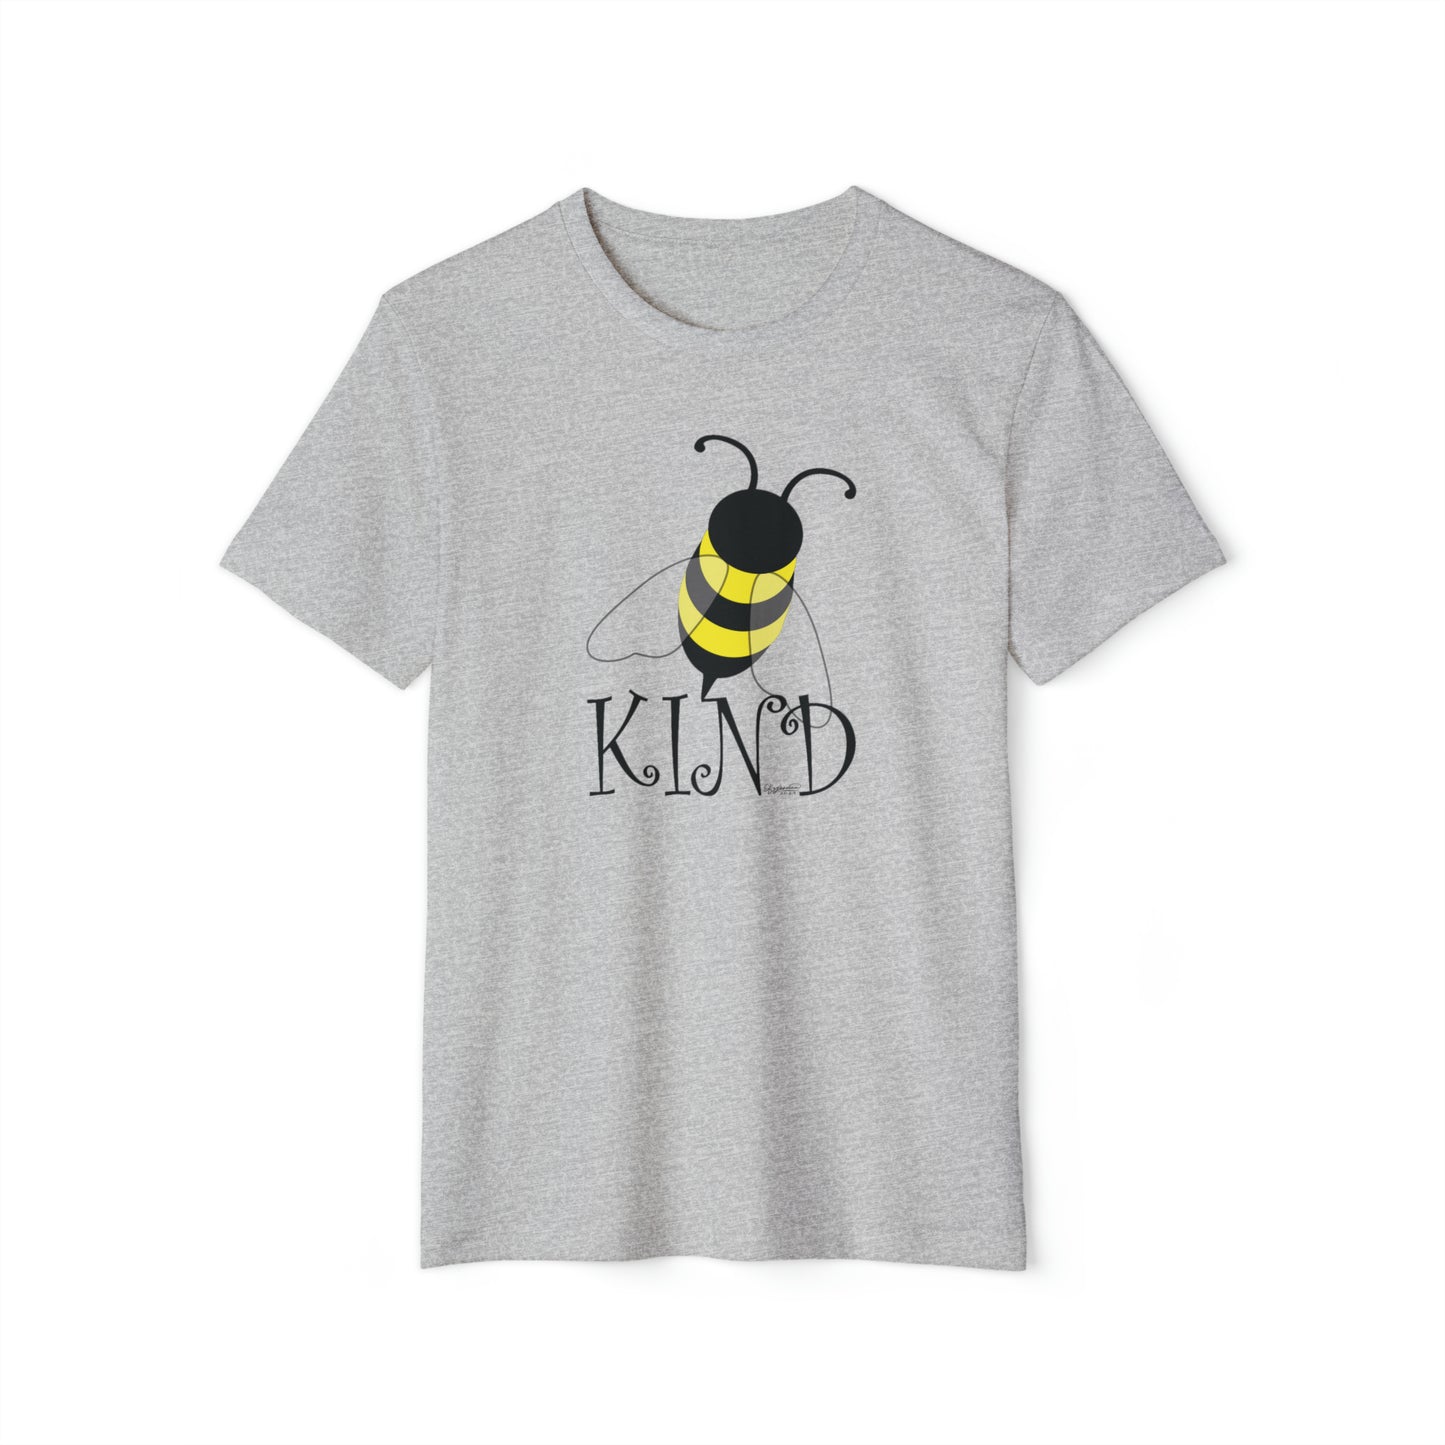 Bee Kind: The Eco-Friendly Organic Recycled Unisex T-Shirt That Shows Your Love for Nature and Compassion